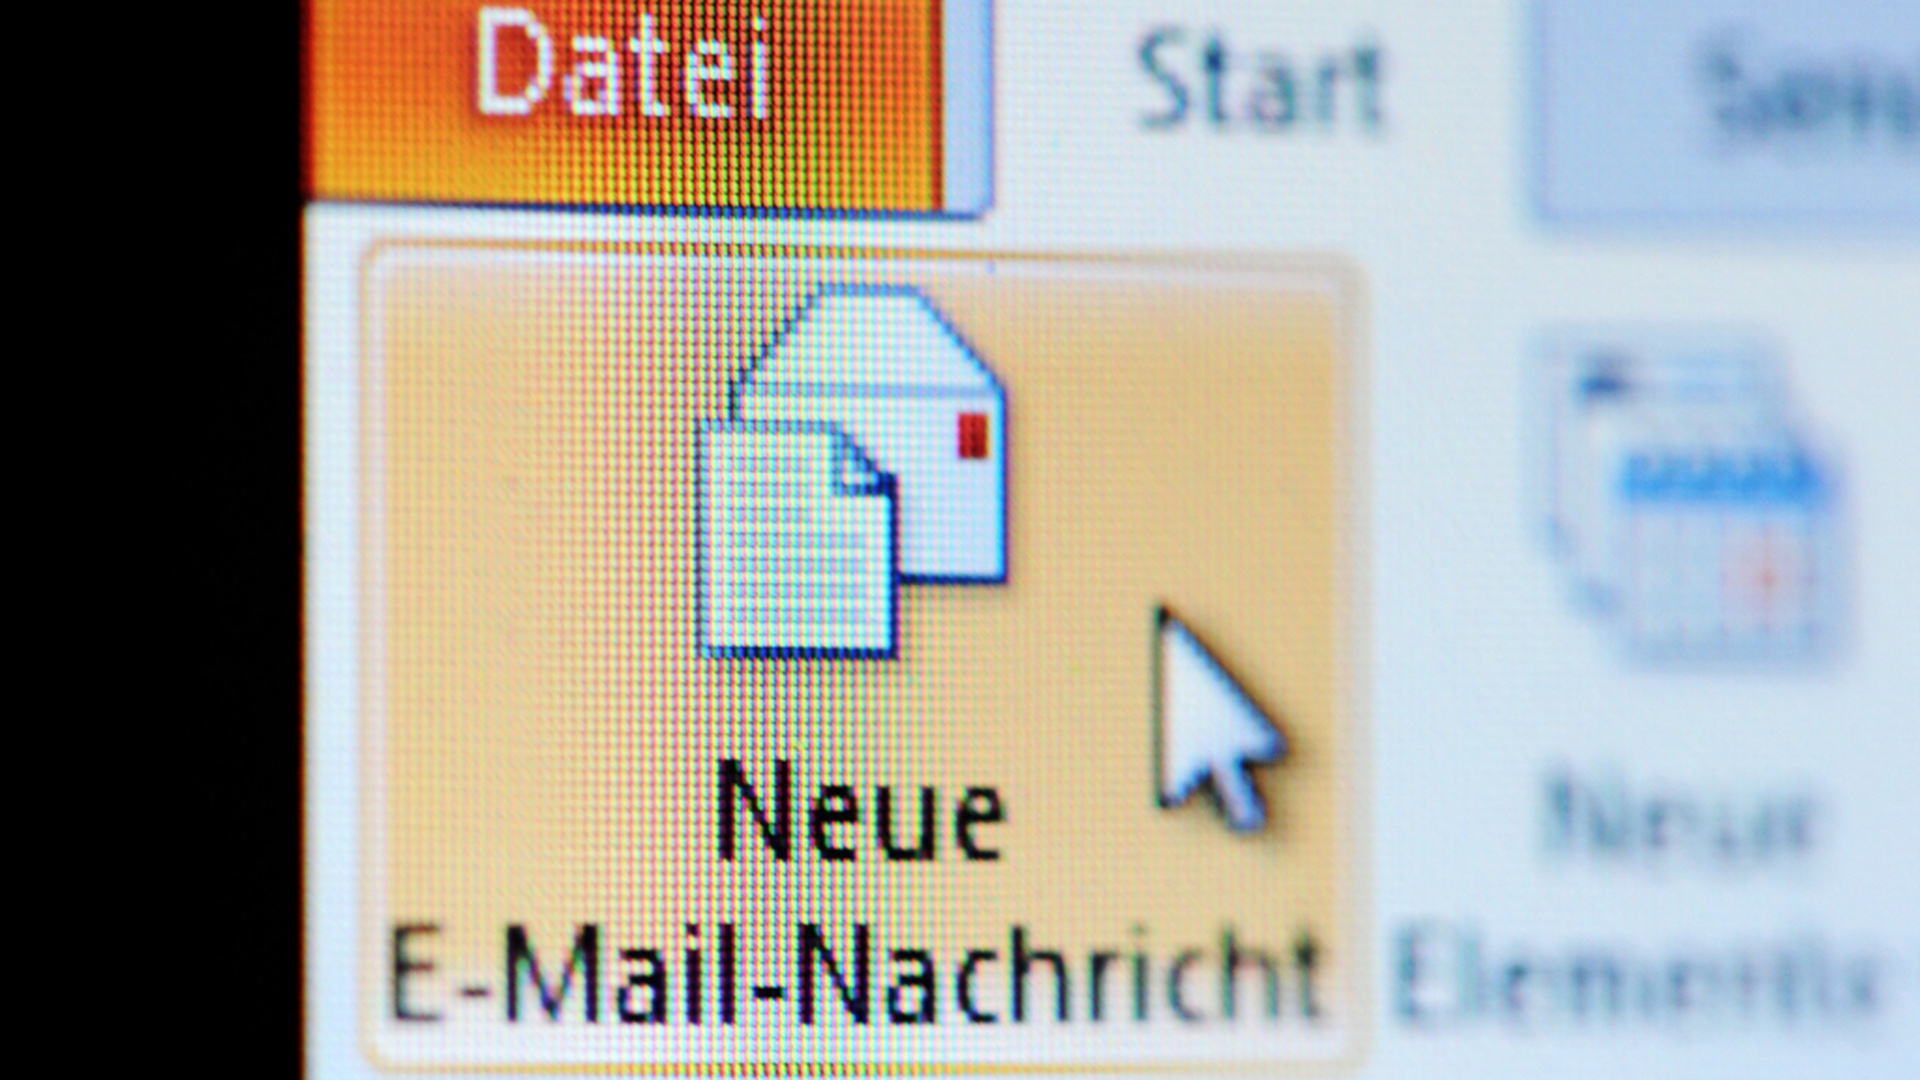 Posteingang eines E-Mail-Accounts